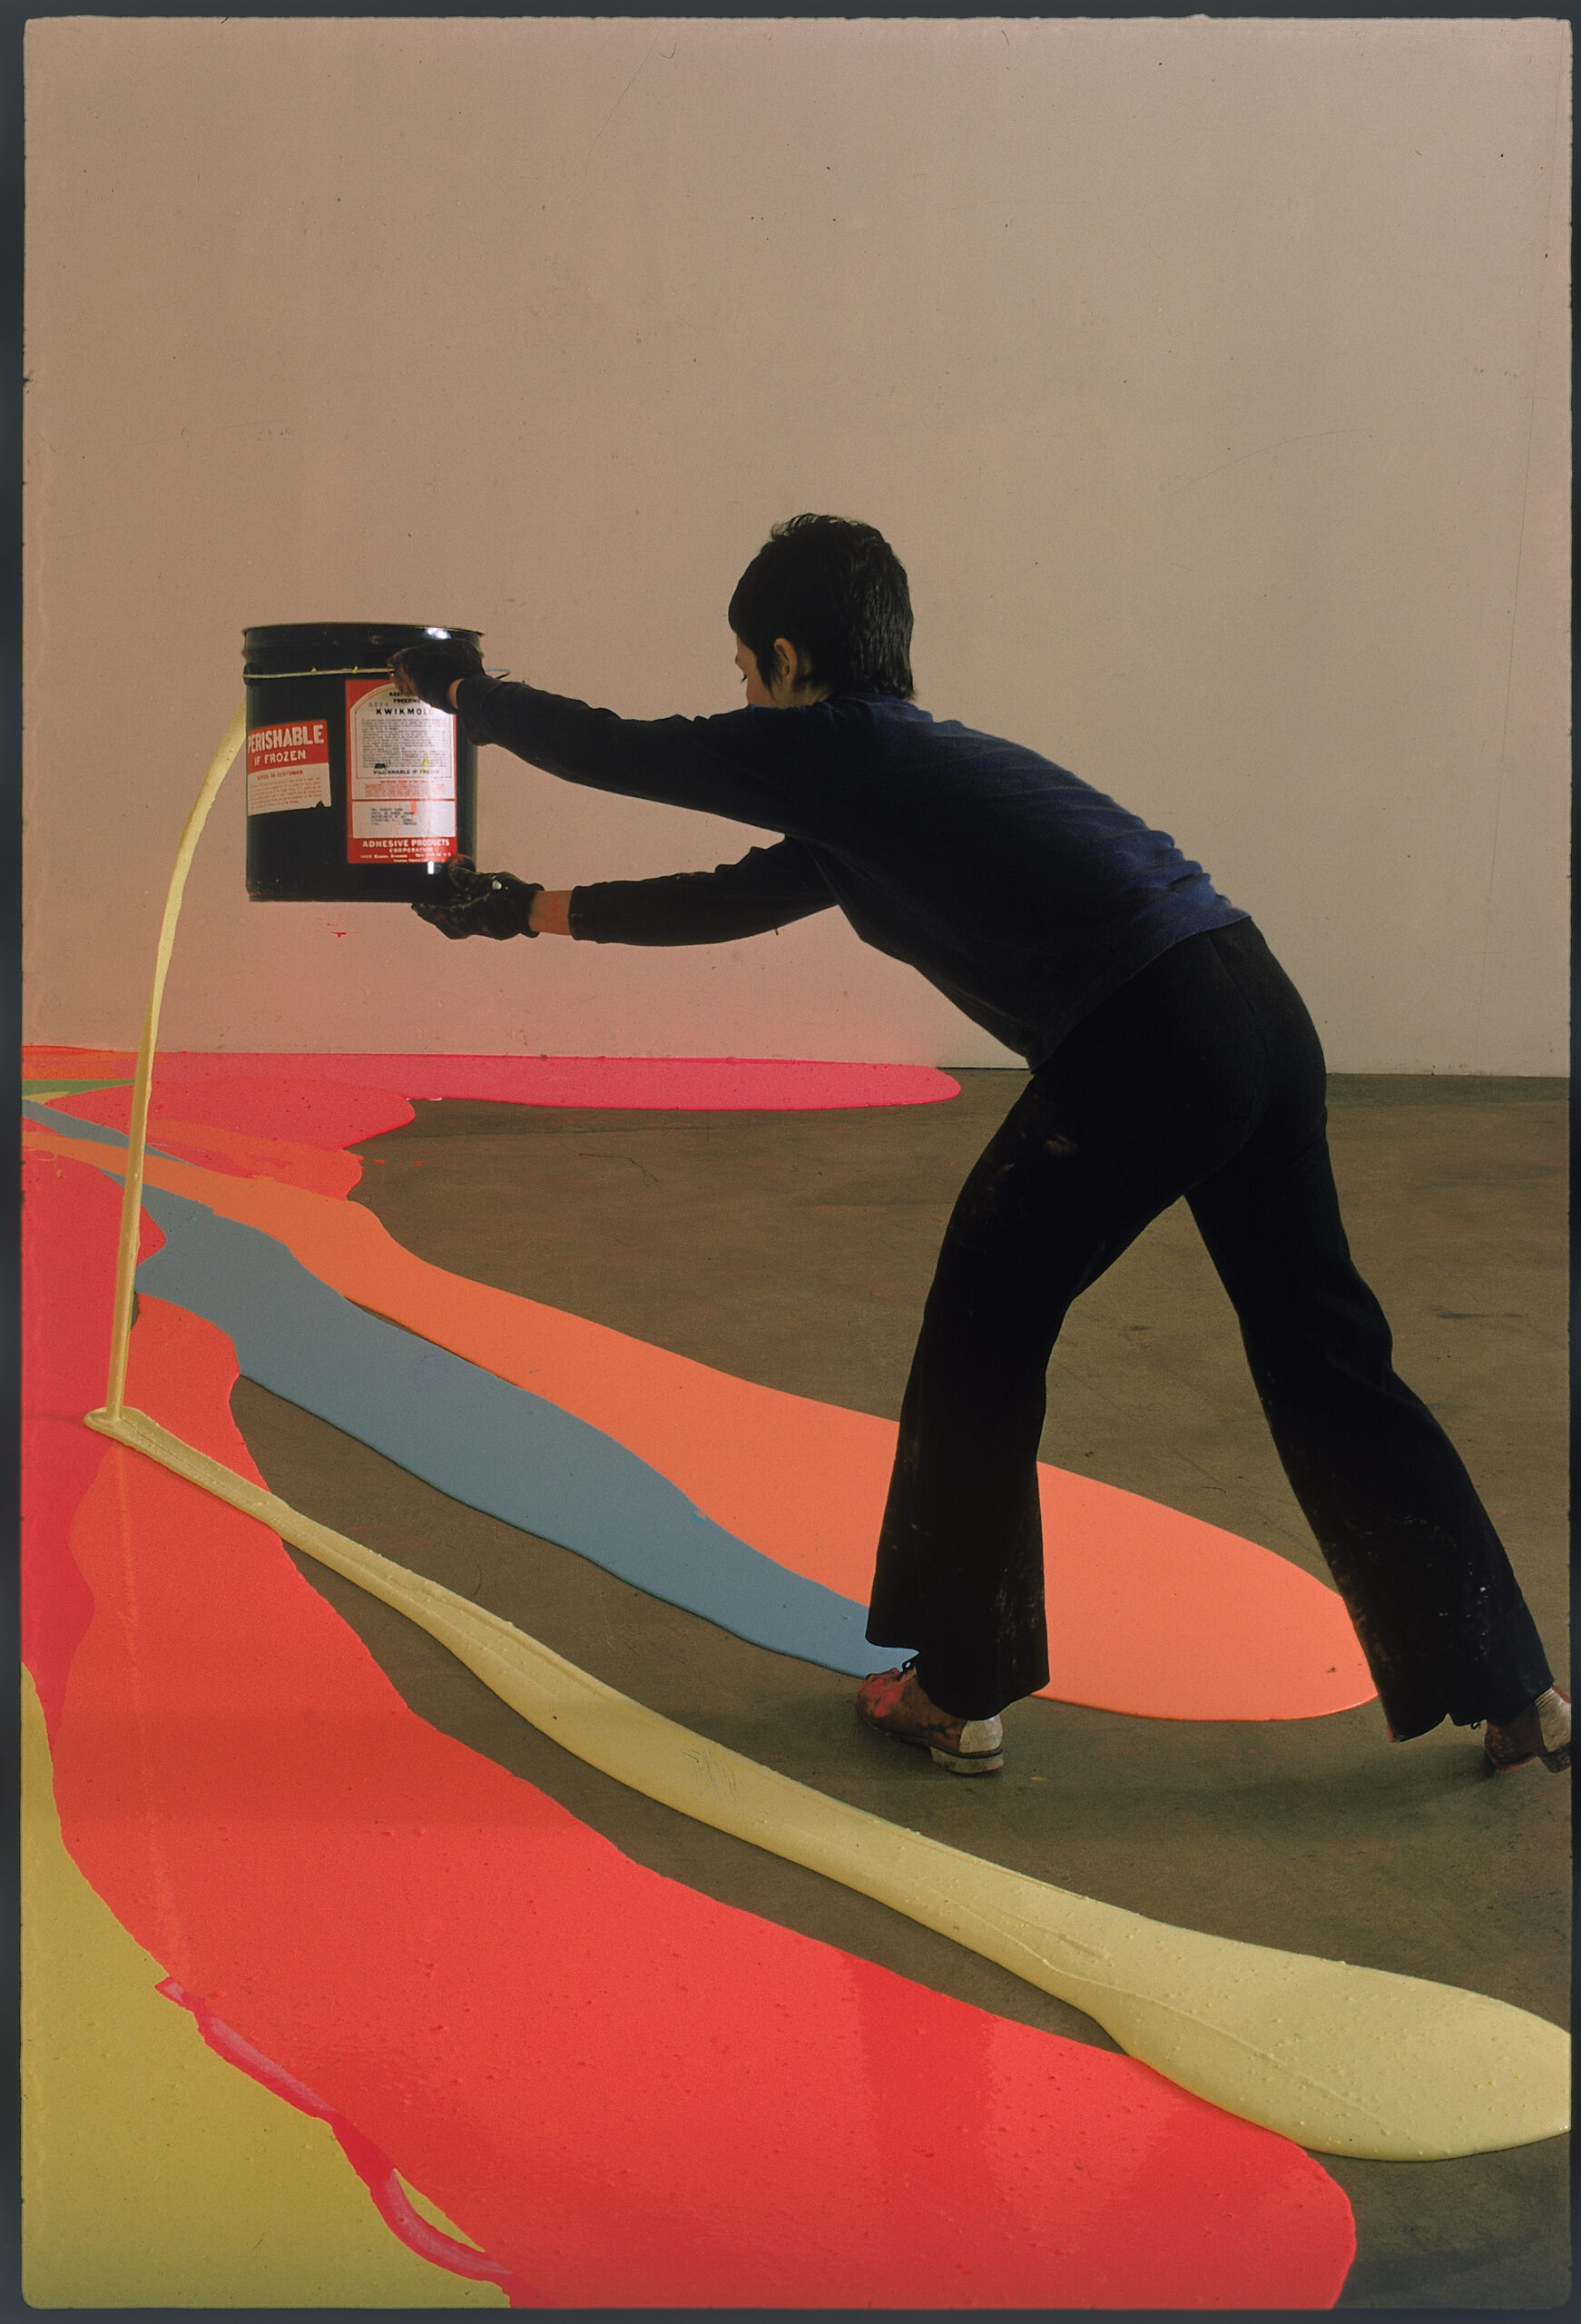 A woman dressed in black spilling paint from a paint can onto the floor, which already has paint spills in orange, blue, and yellow.